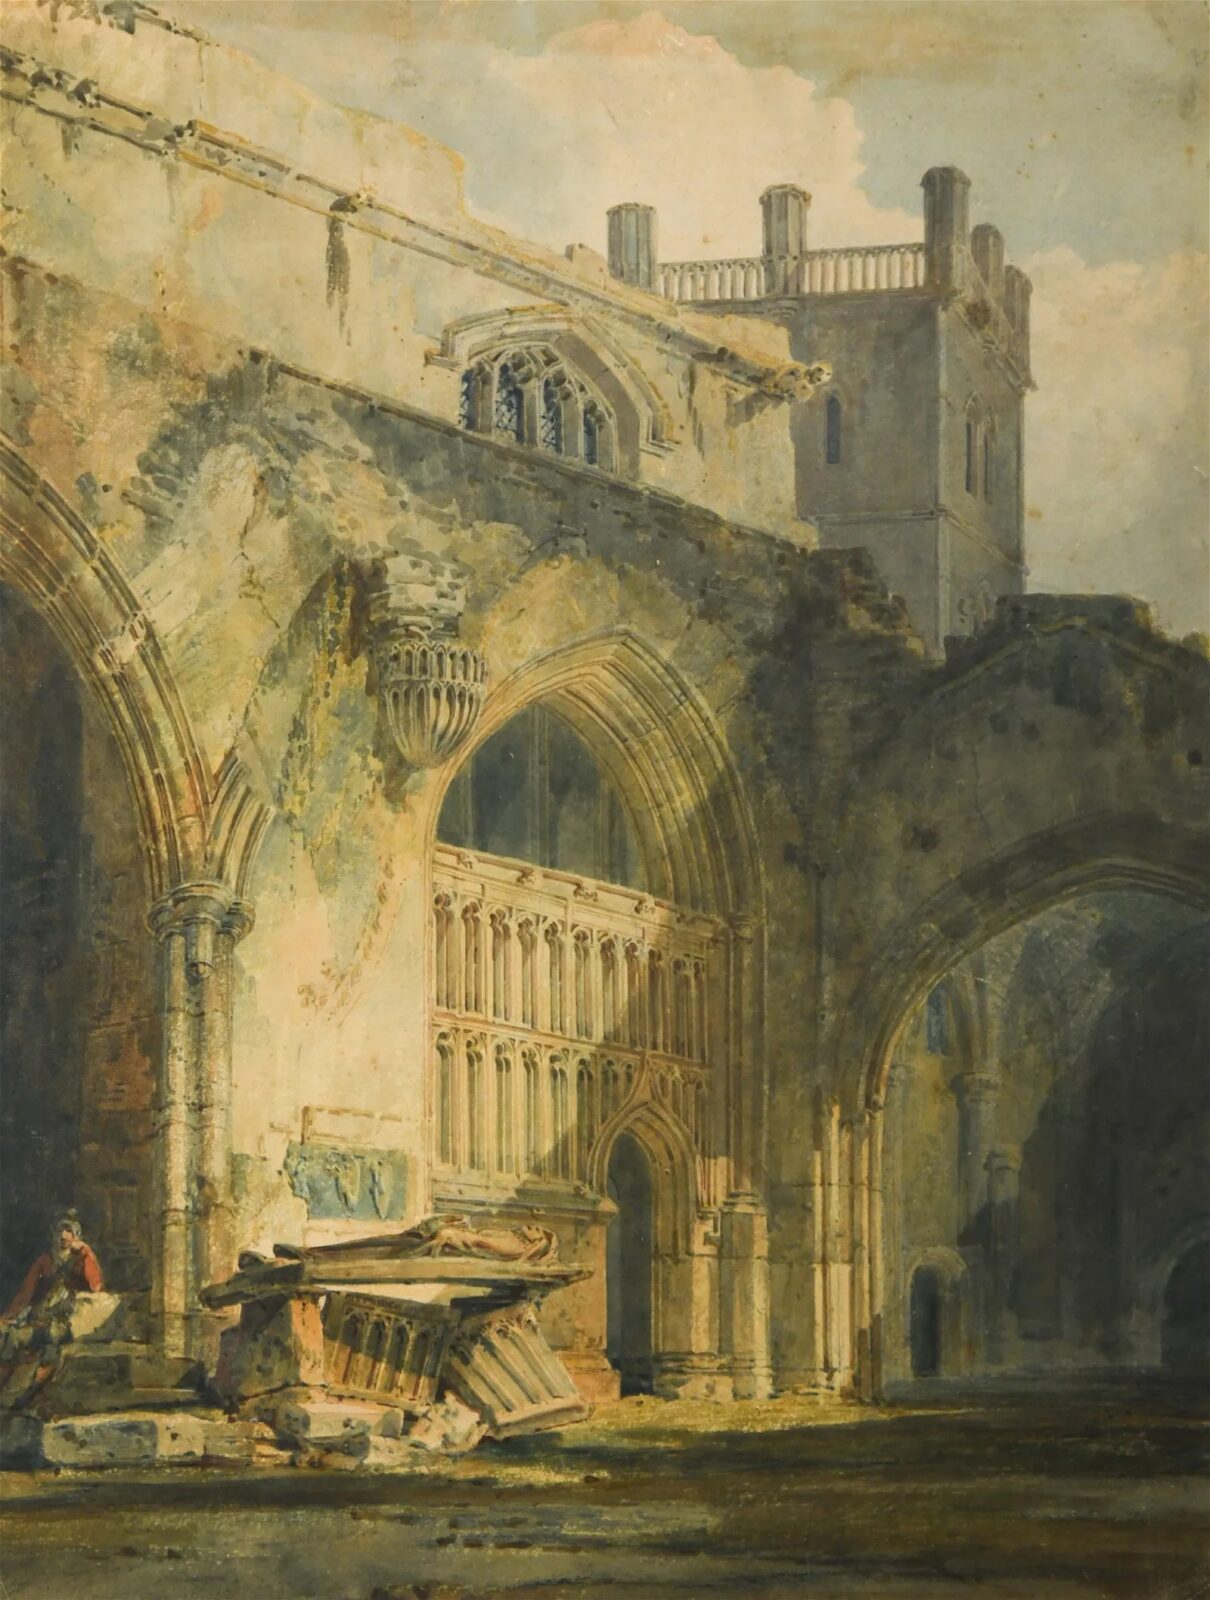 J. M. W. Turner, ‘The Entrance to Bishop Vaughan's Chapel, St David's Cathedral, Wales,’ which hammered for £37,000 ($46,775) and sold for £46,250 ($58,470) with buyer’s premium at Cheffins on March 20.